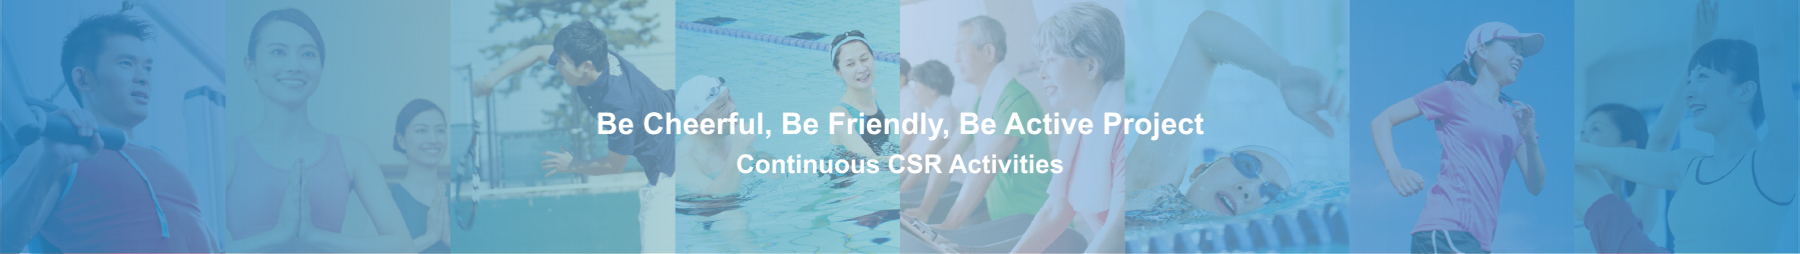 Be Cheerful, Be Friendly, Be Active Project Continuous CSR Activities